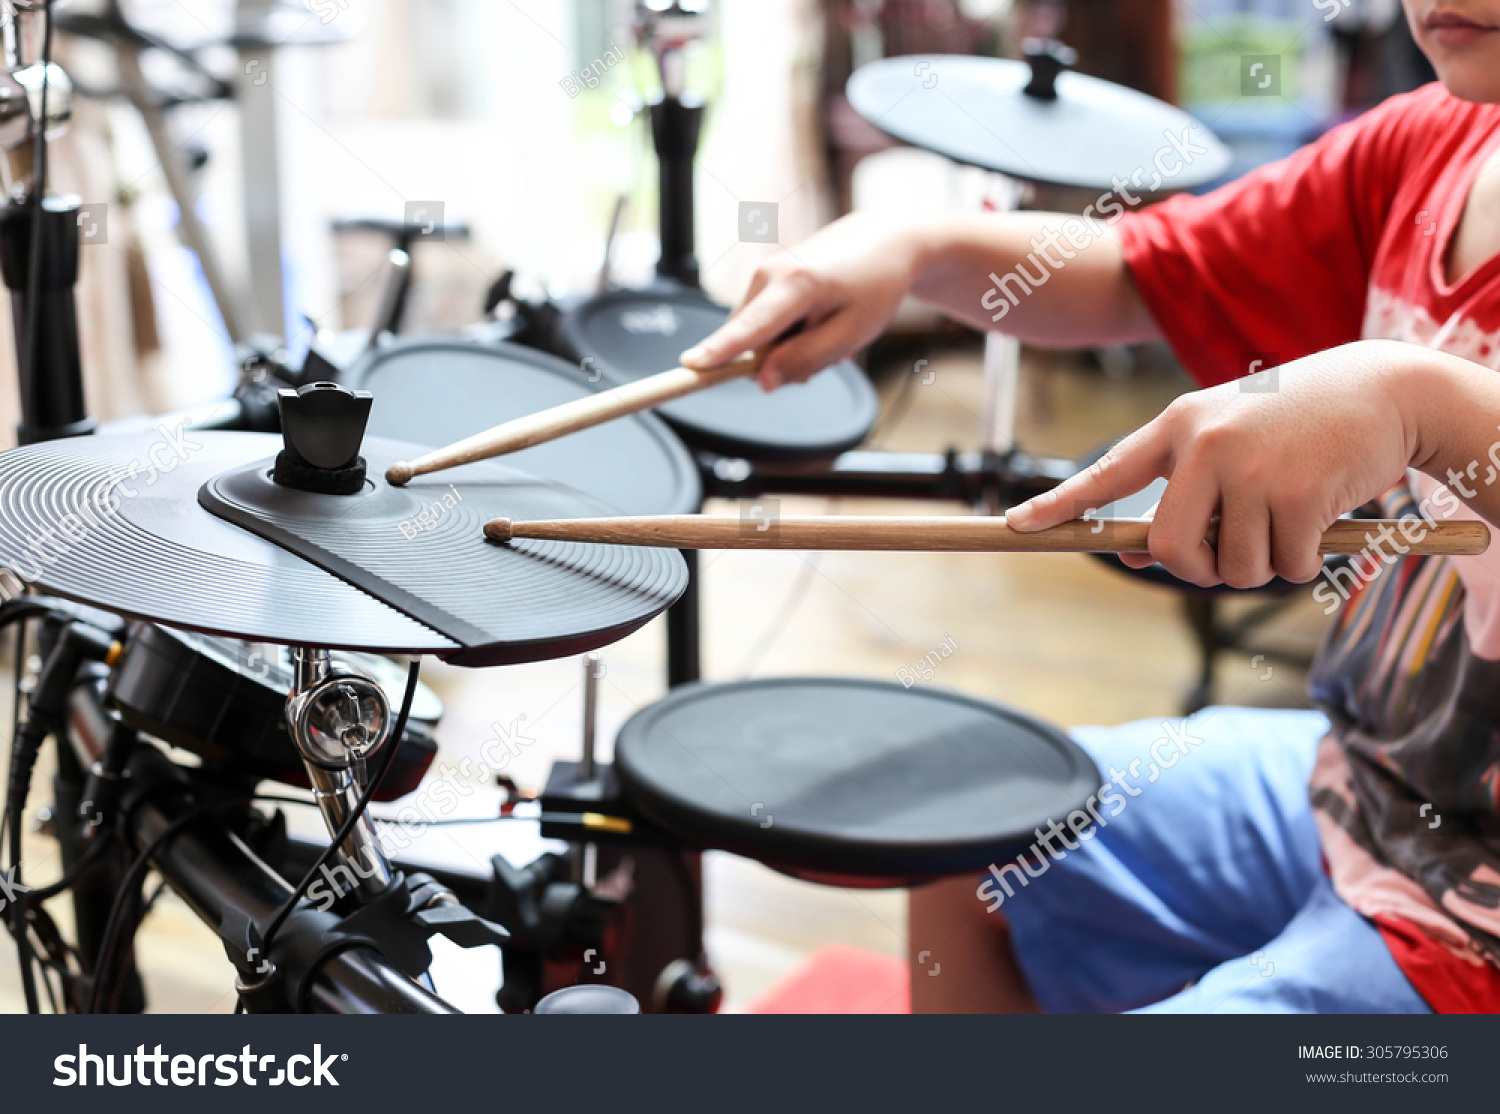 Unidentified Asian boy play electronic drum in music room #305795306